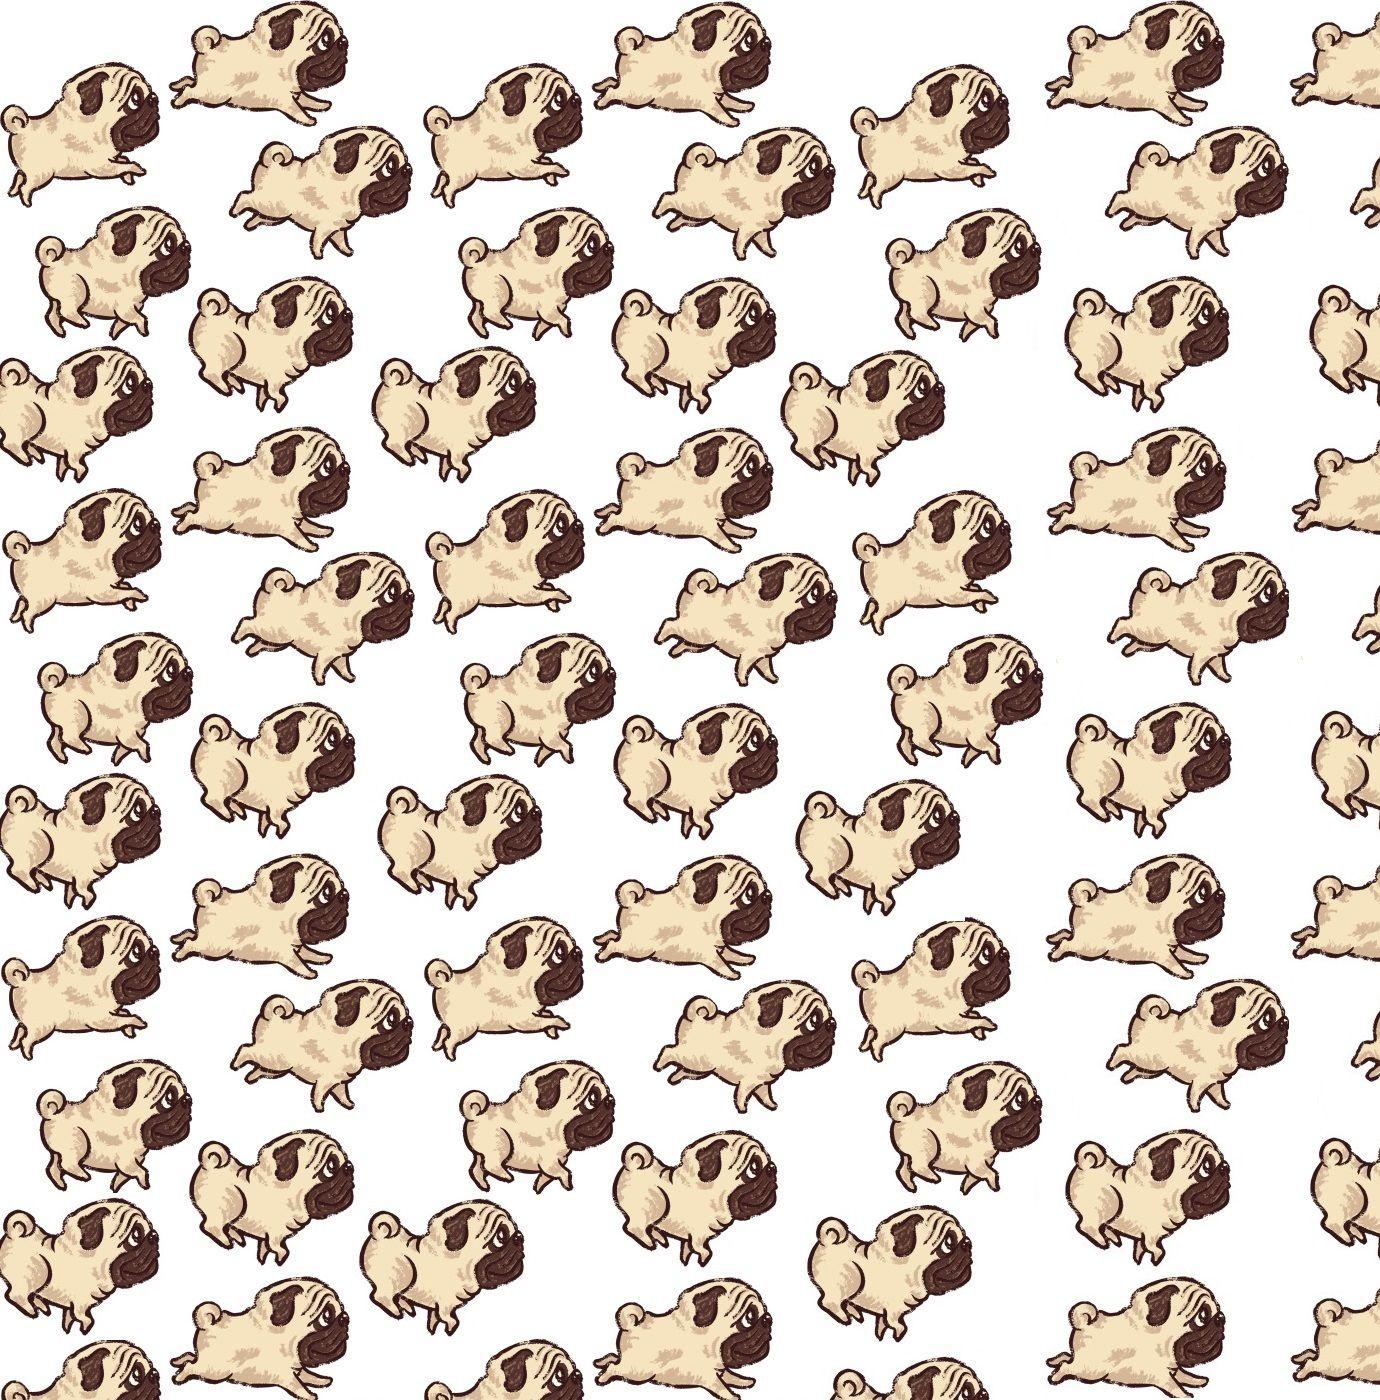 Use this pattern to make a cute Pug Background for your Twitter or